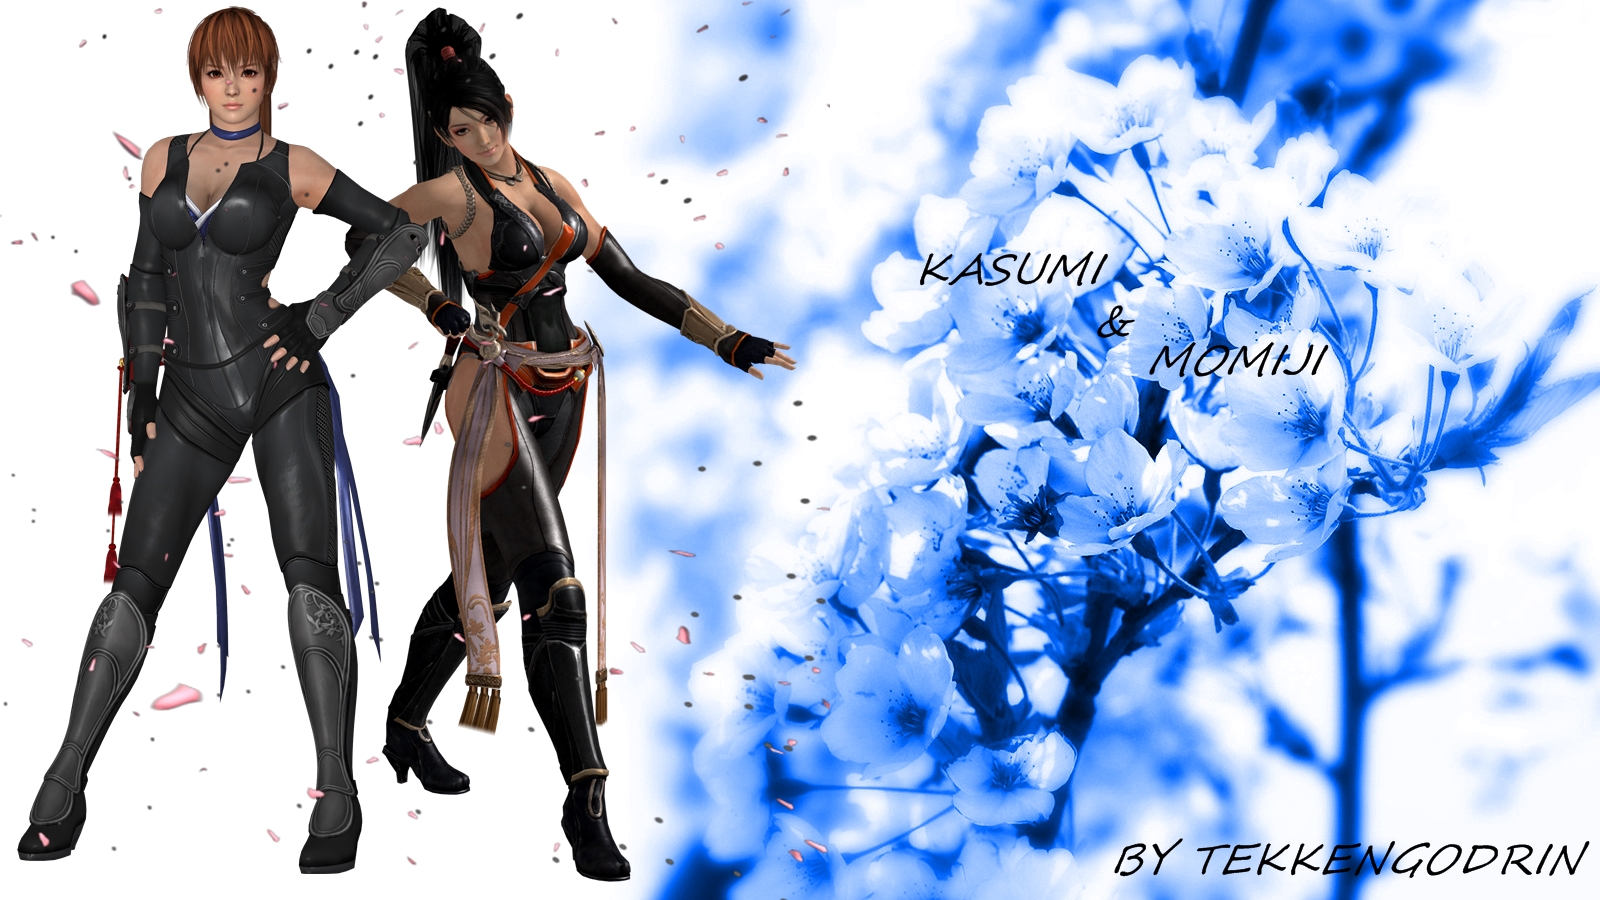 Dead Or Alive Kasumi And Momiji Wallpaper By Tekkengodrin On